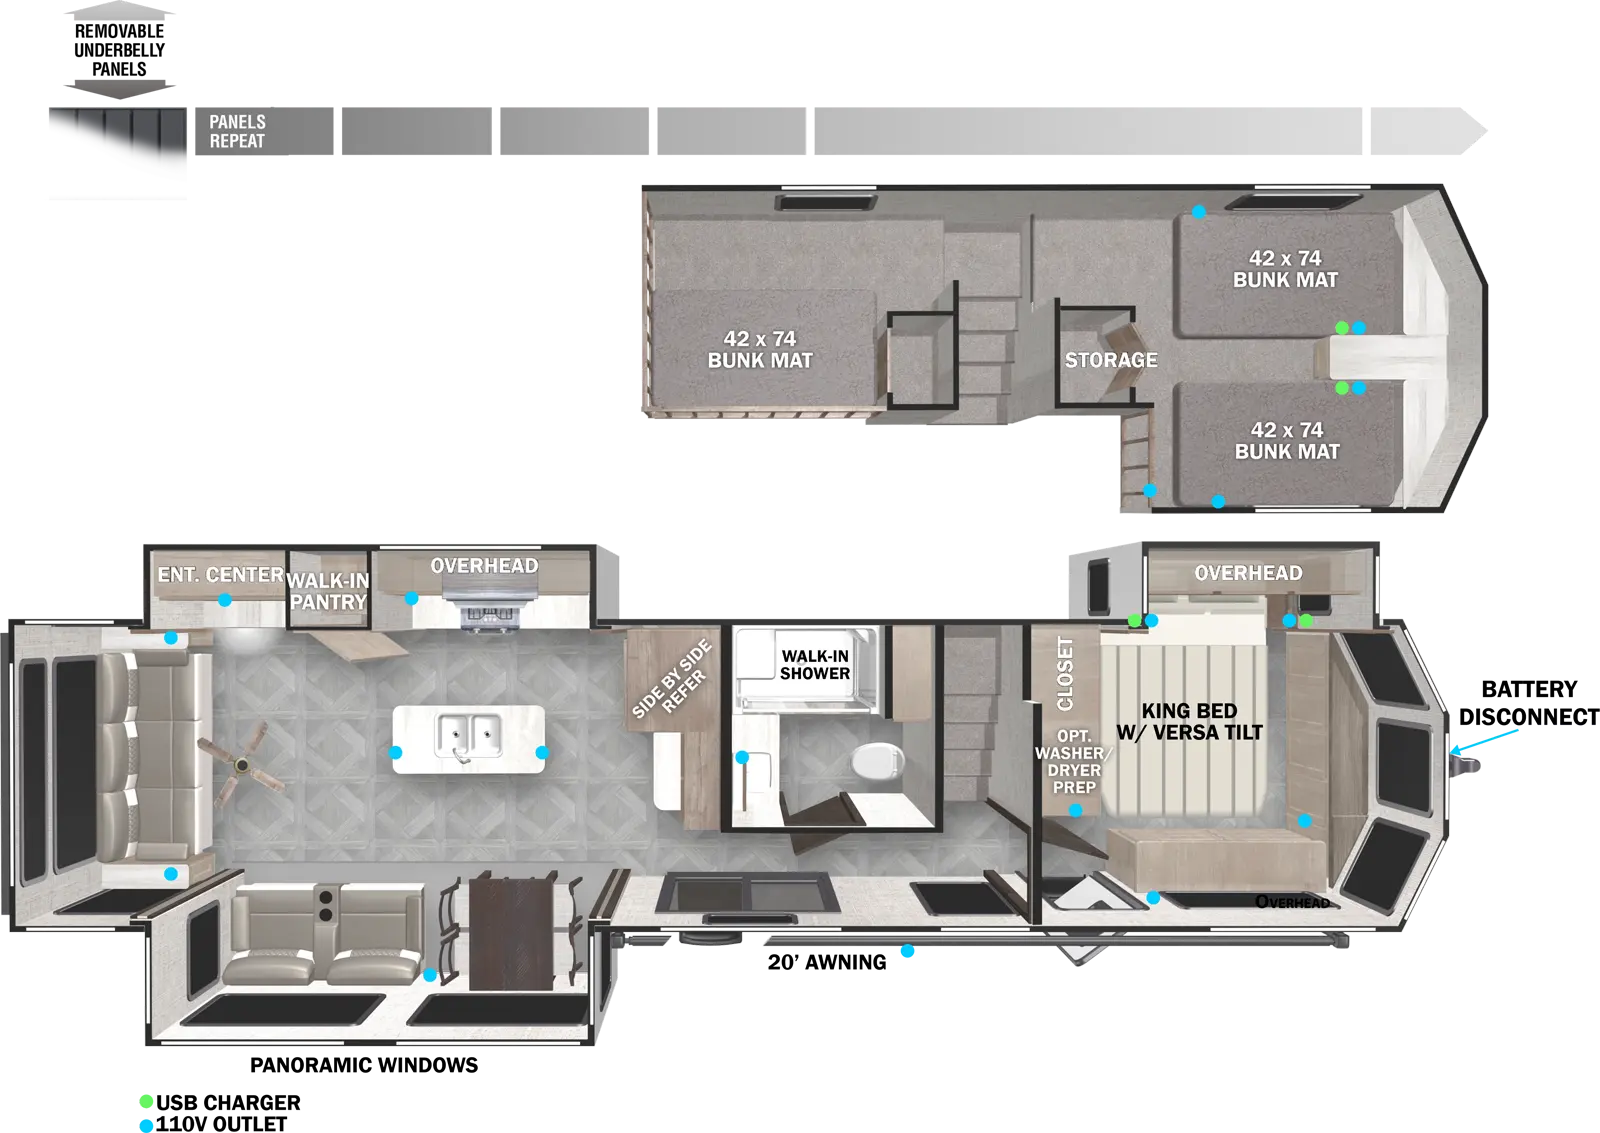 The 42DL has three slideouts and two entries. Exterior features include a 20 foot awning, battery disconnect, and removable underbelly panels. Interior layout front to back: off-door side versa-tilt king bed slideout with overhead cabinets, closet with optional washer/dryer prep along inner wall, and door side entry; stairs to loft area; loft area above bedroom with two bunk mats and storage, and loft area above bathroom with bunk mat; full bathroom with walk-in shower; patio door entry; side-by-side refrigerator along inner wall; kitchen island with sink; off-door side slideout with kitchen overhead cabinets, walk-in pantry and entertainment center; door side slideout with dining, seating and panoramic window; rear seating. 